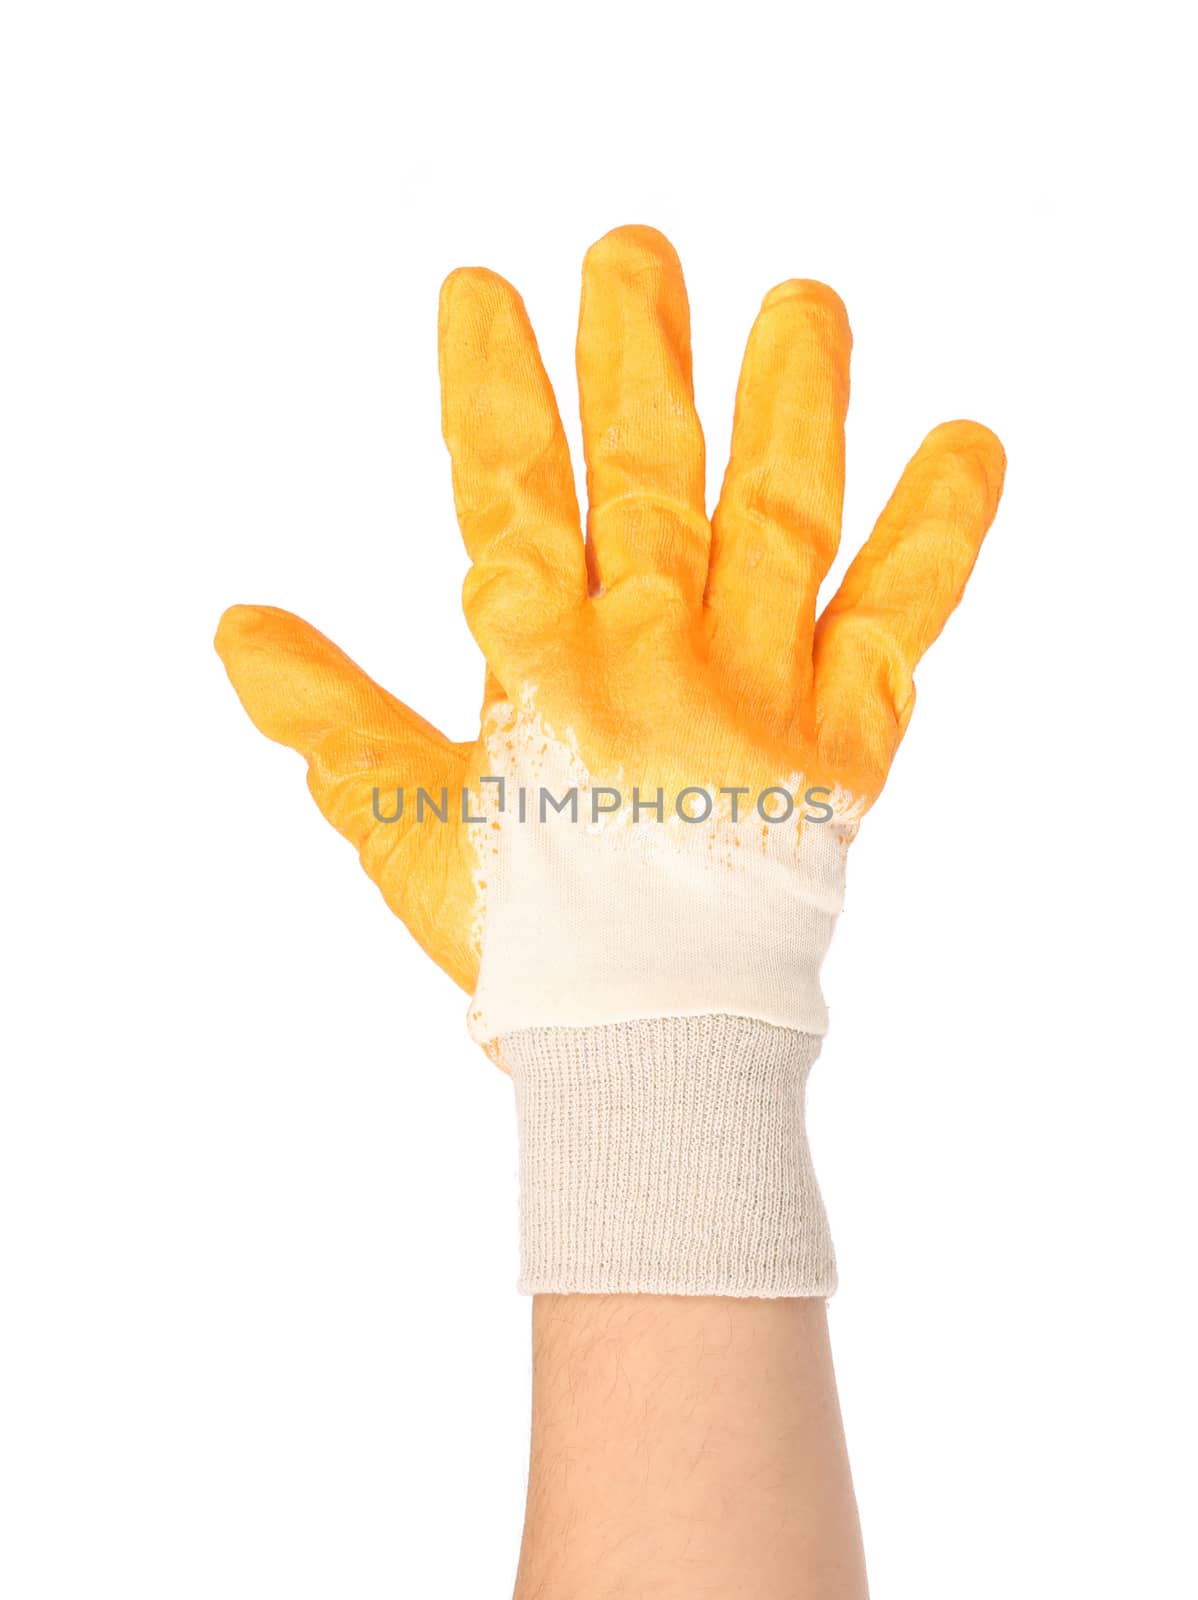 Hand in rubber glove shows five. by indigolotos